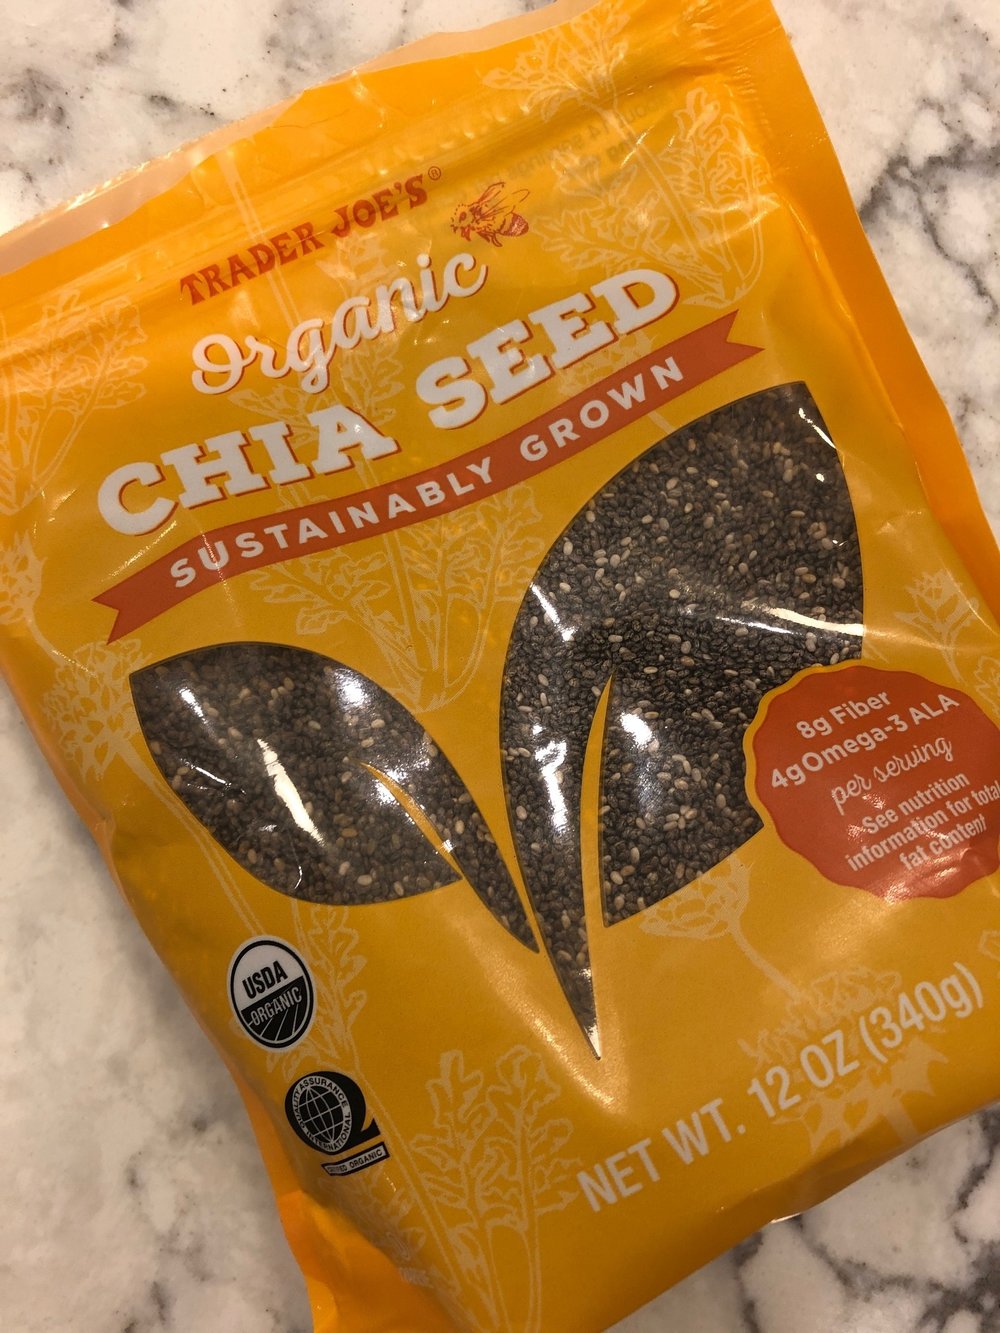 What to do with Chia Seeds